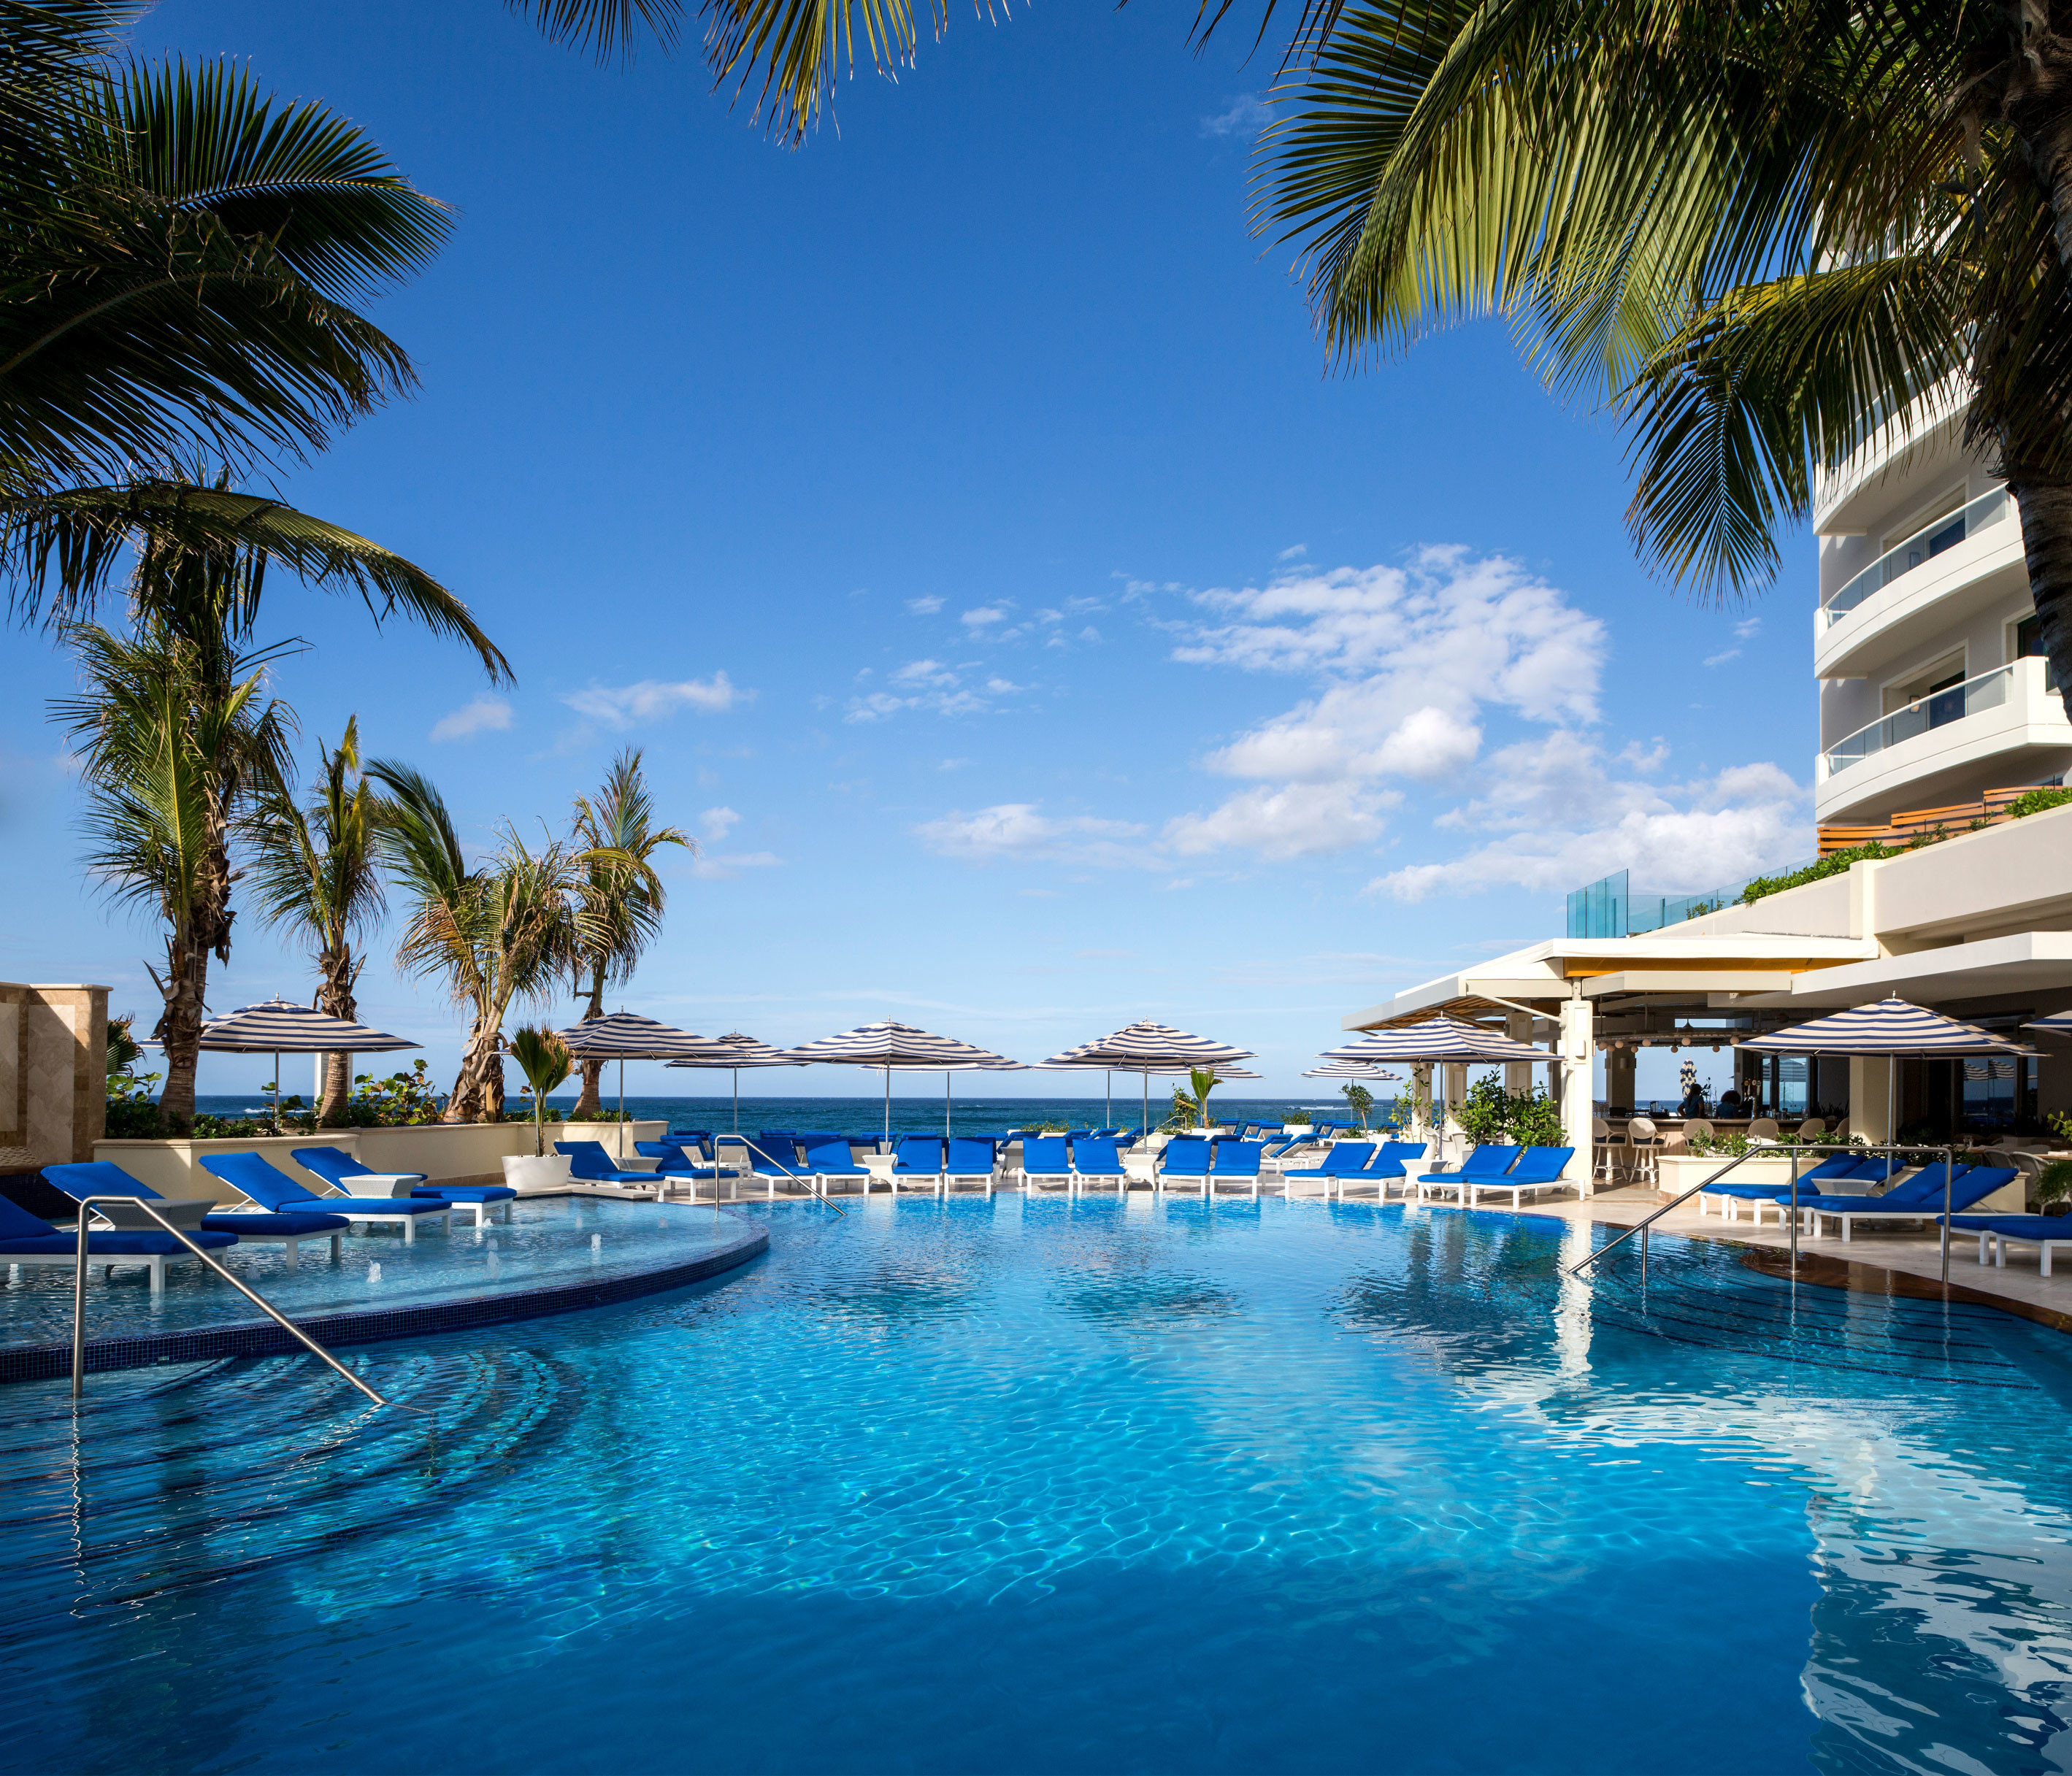 The 10 Best Hotels in Puerto Rico